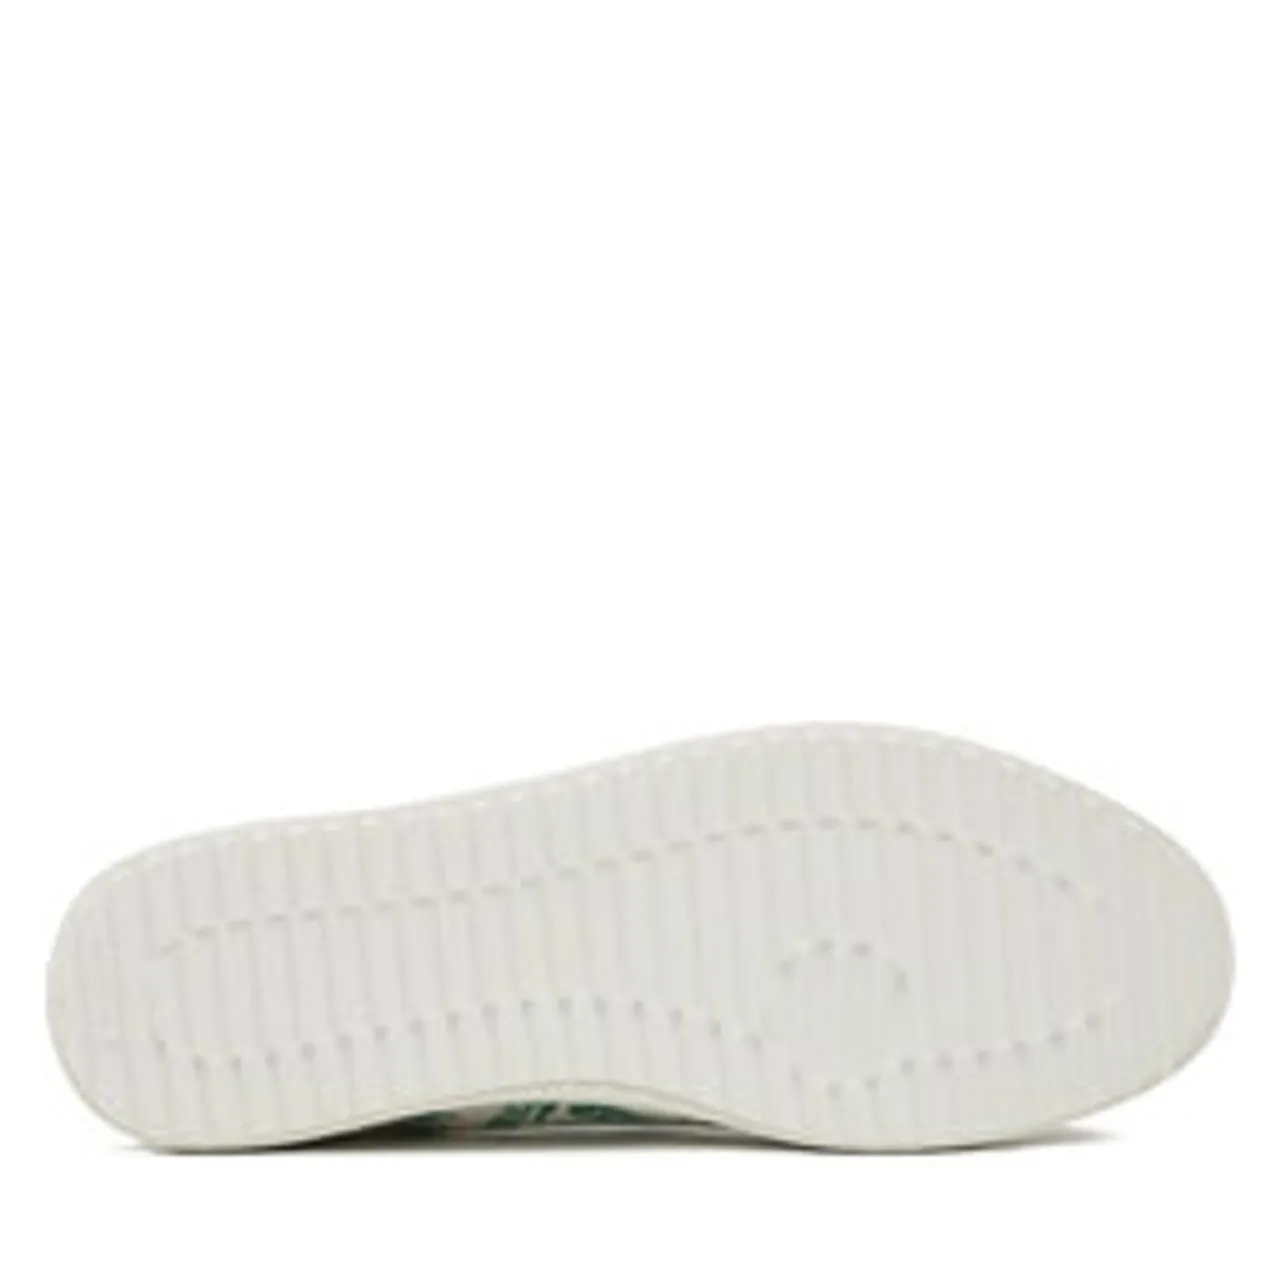 Sneakers aus Stoff Lacoste Canvas Resort 123 2 Cma 745CMA0038WG1 Off Wht/Grn